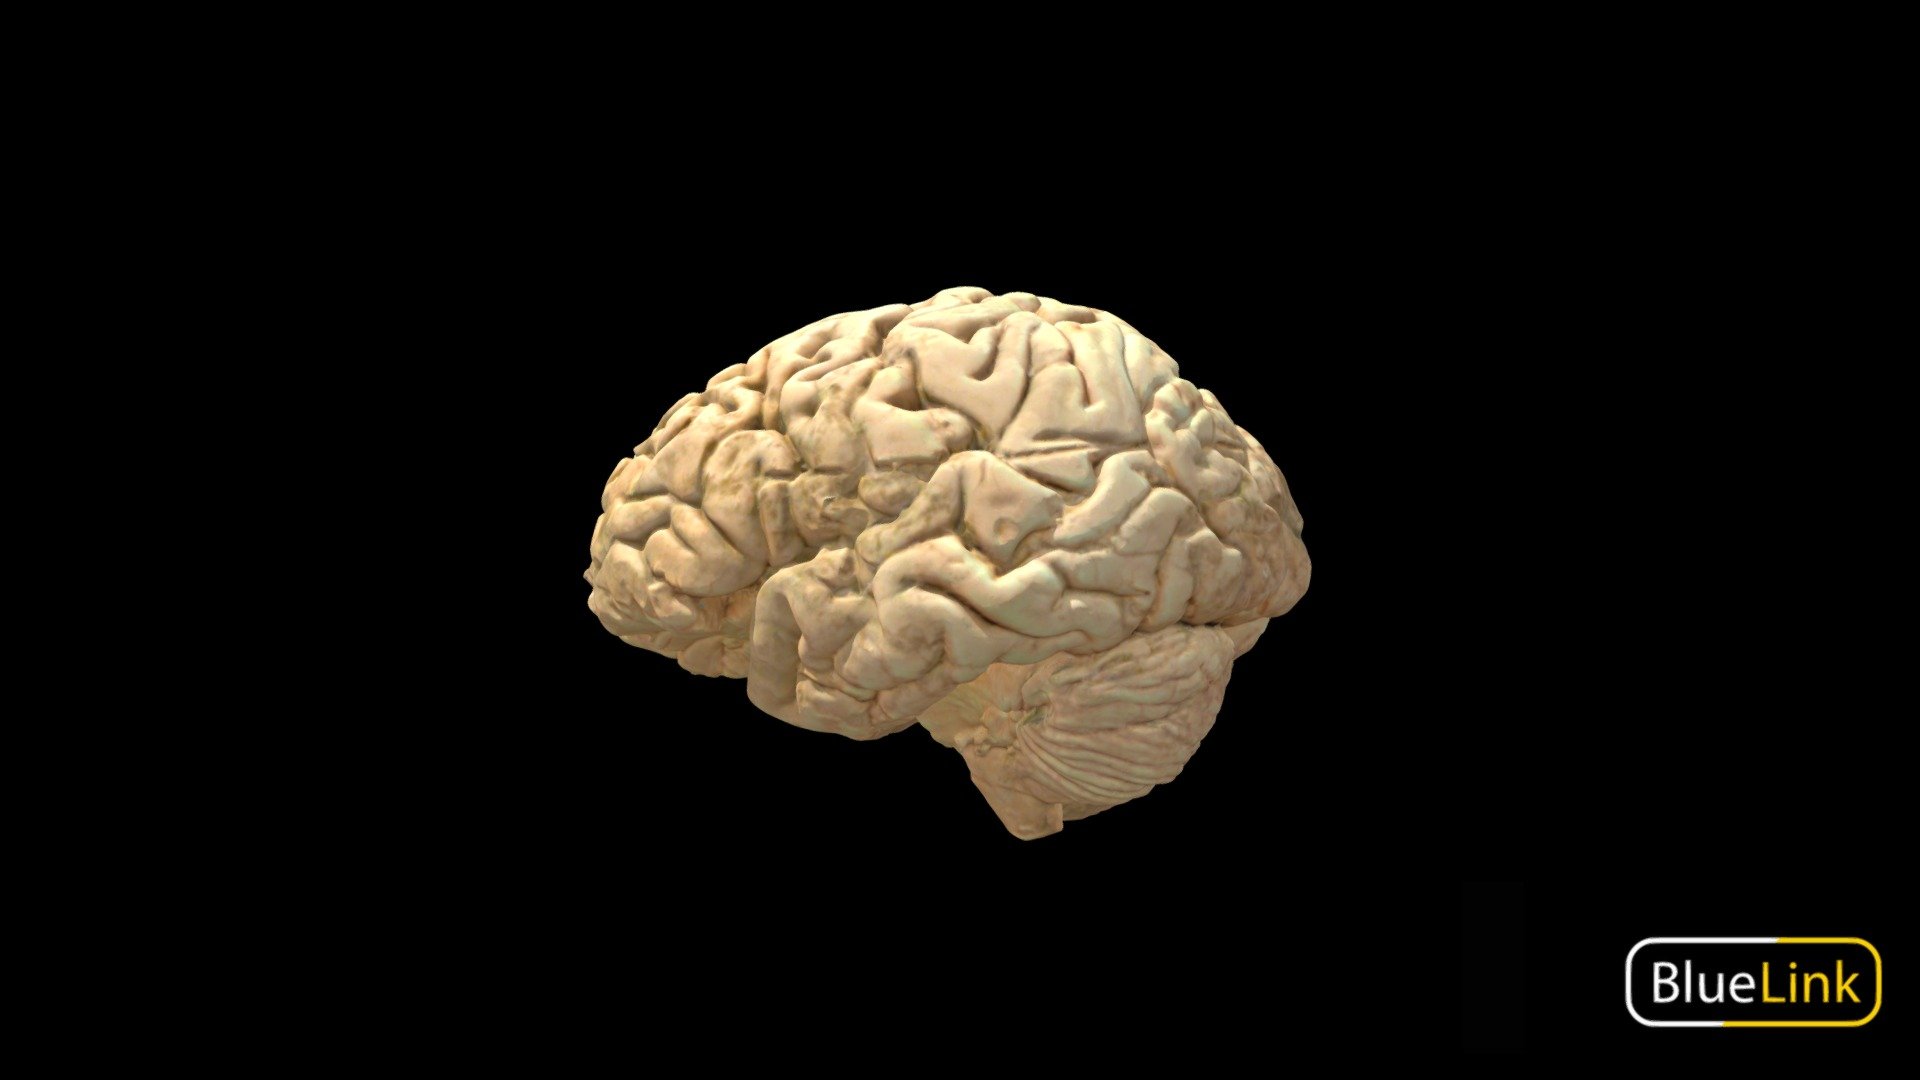 3D scan of the whole brain

Captured with Einscan Pro

Captured and edited by: Eve Roebke and Madelyn Murphy, Cristina Prall

Copyright2019 BK Alsup &amp; GM Fox - Brain - Whole, Labeled - 3D model by Bluelink Anatomy - University of Michigan (@bluelinkanatomy) 3d model